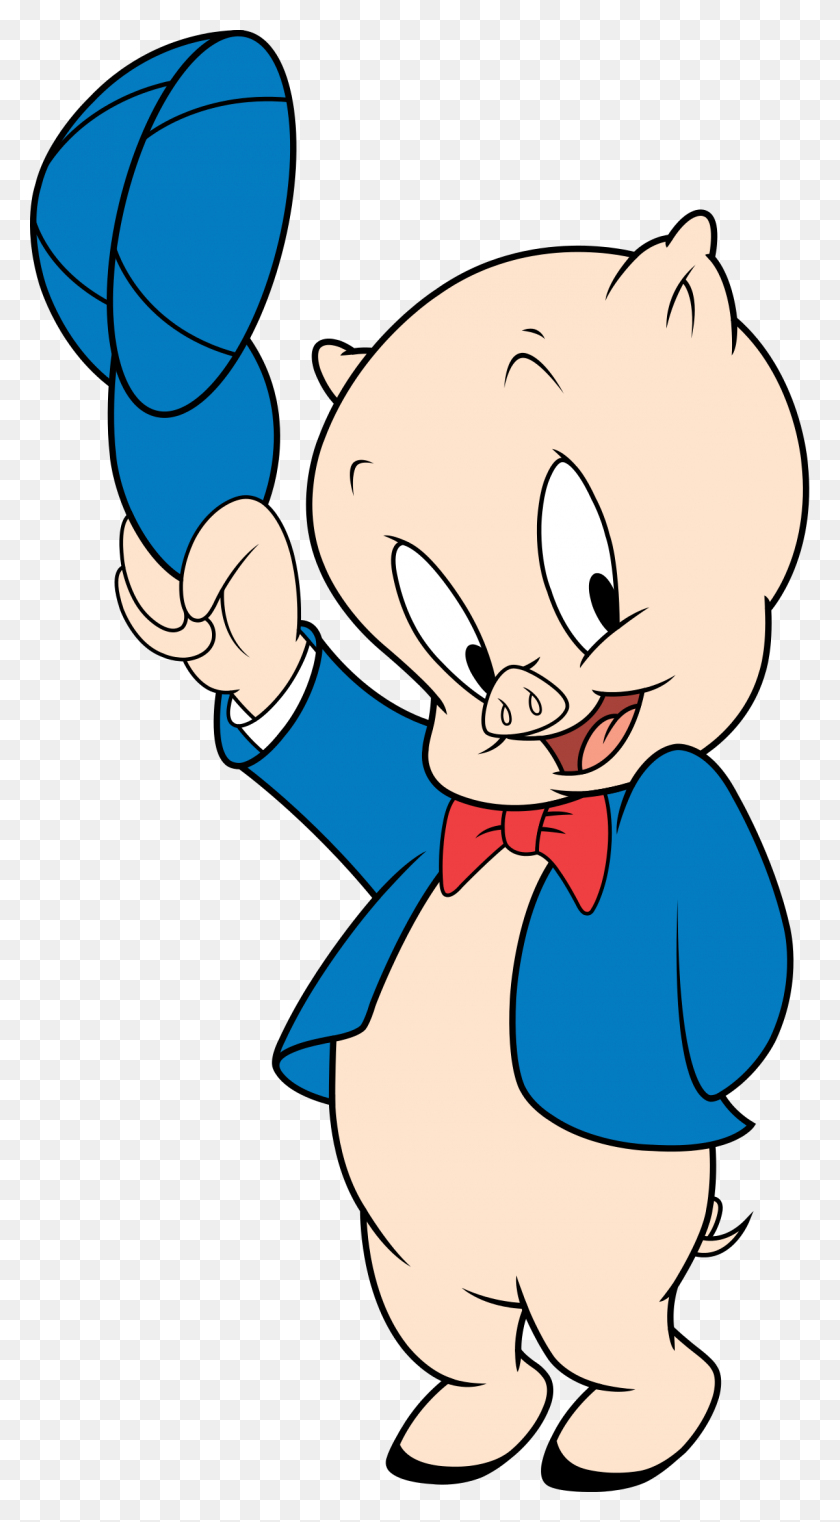 1200x2250 Pictures Of A Cartoon Pig Image Group - Pig Pen Clipart